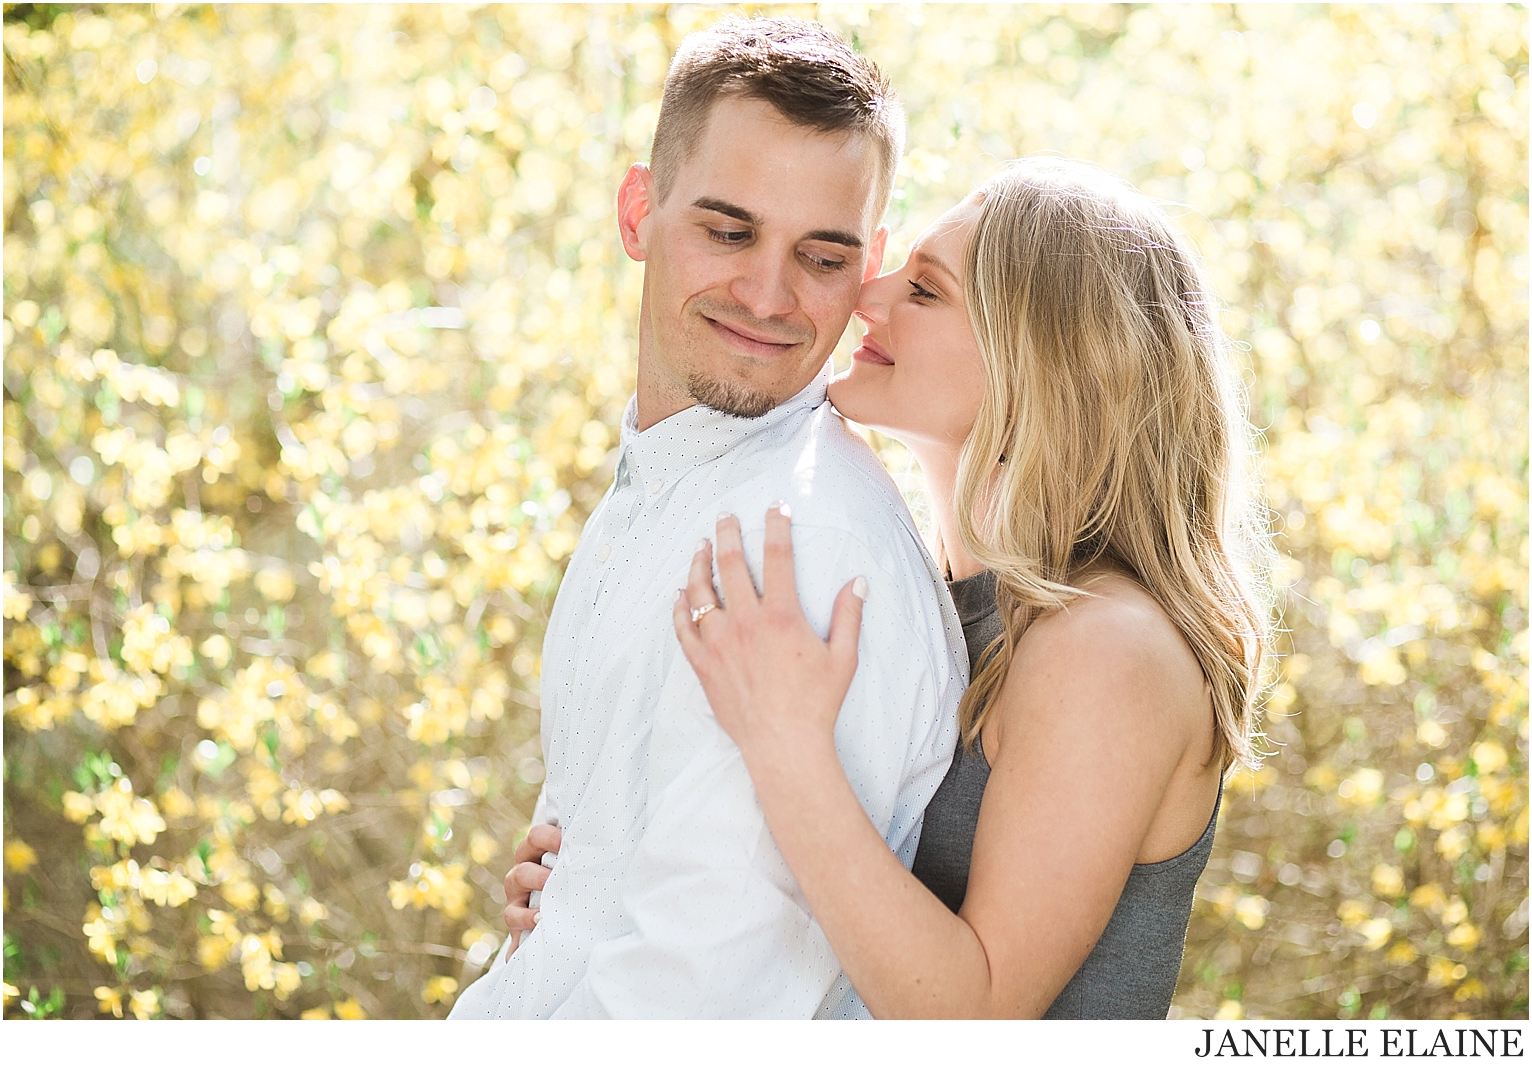 tricia and nate engagement photos-janelle elaine photography-86.jpg